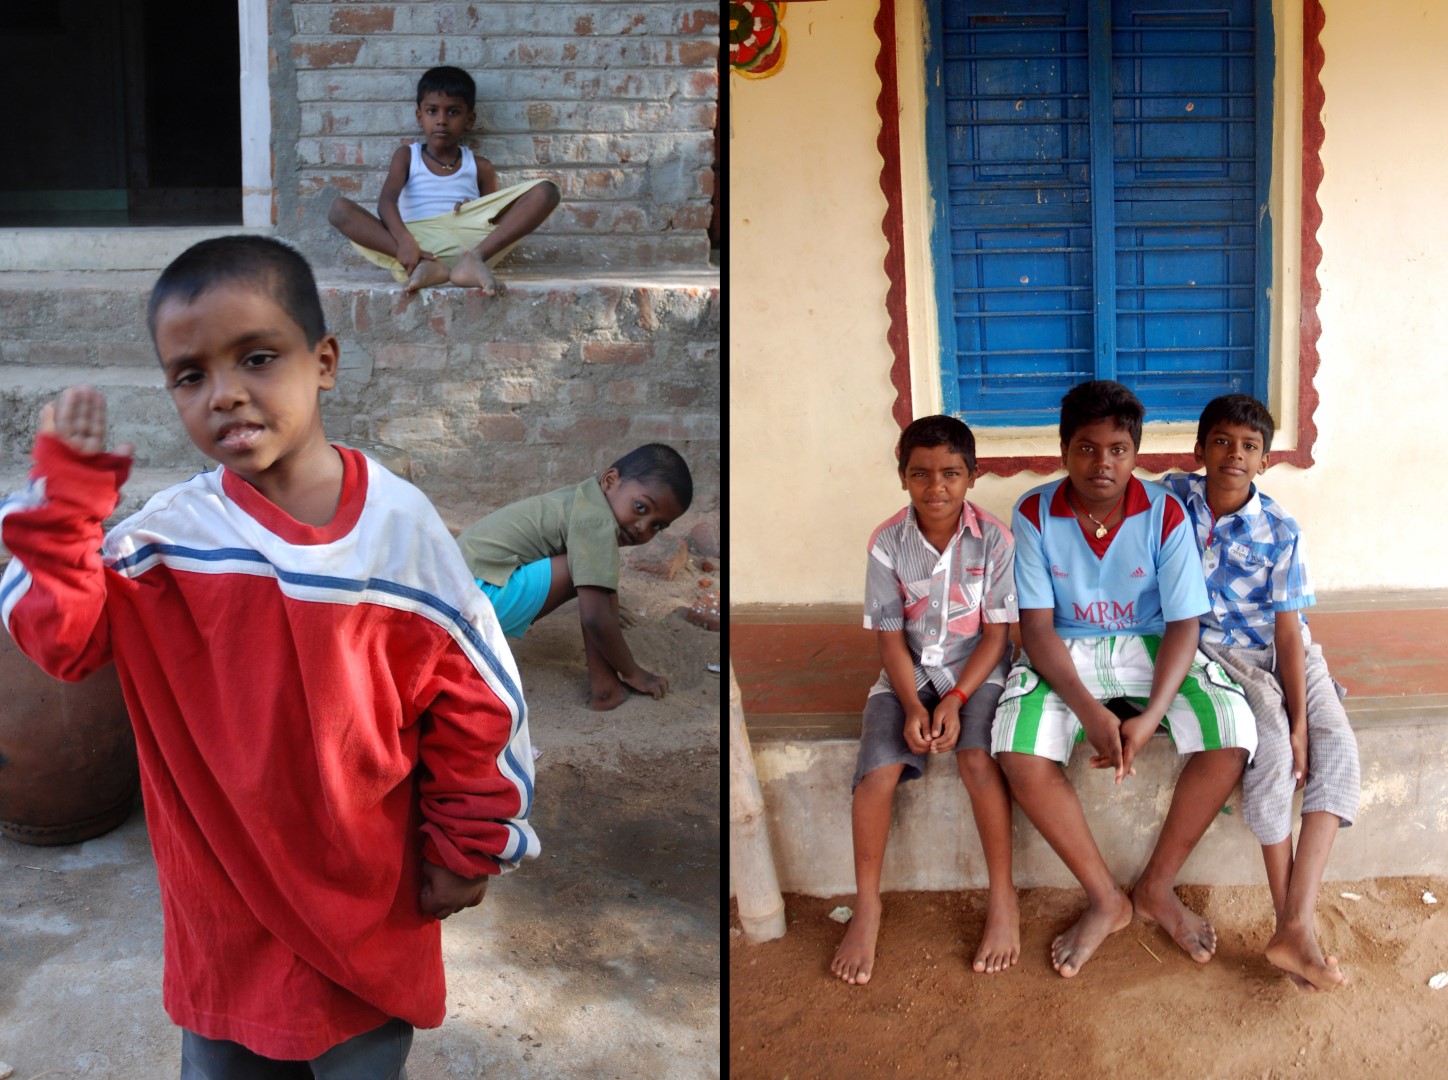 Cousin-brothers, best friends or both? Nagalingam, Shankar and Vishwanathan in 2008 and in 2014